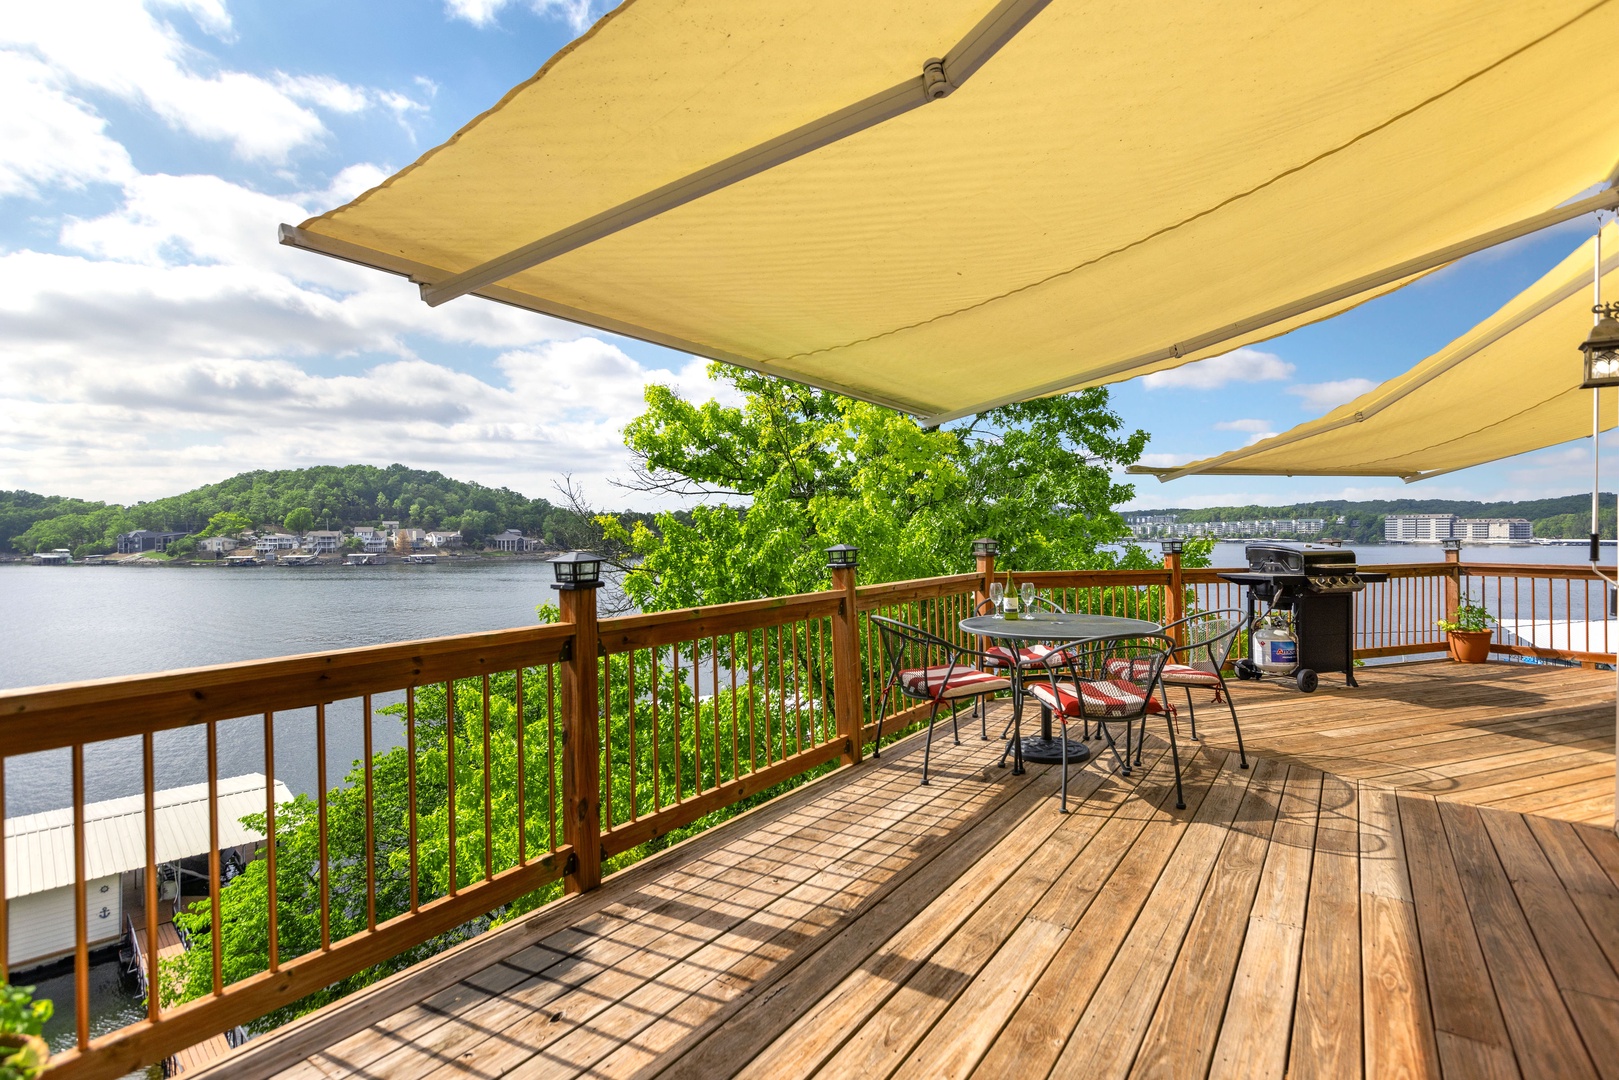 Ample top deck space with a grill and shaded areas for your enjoyment